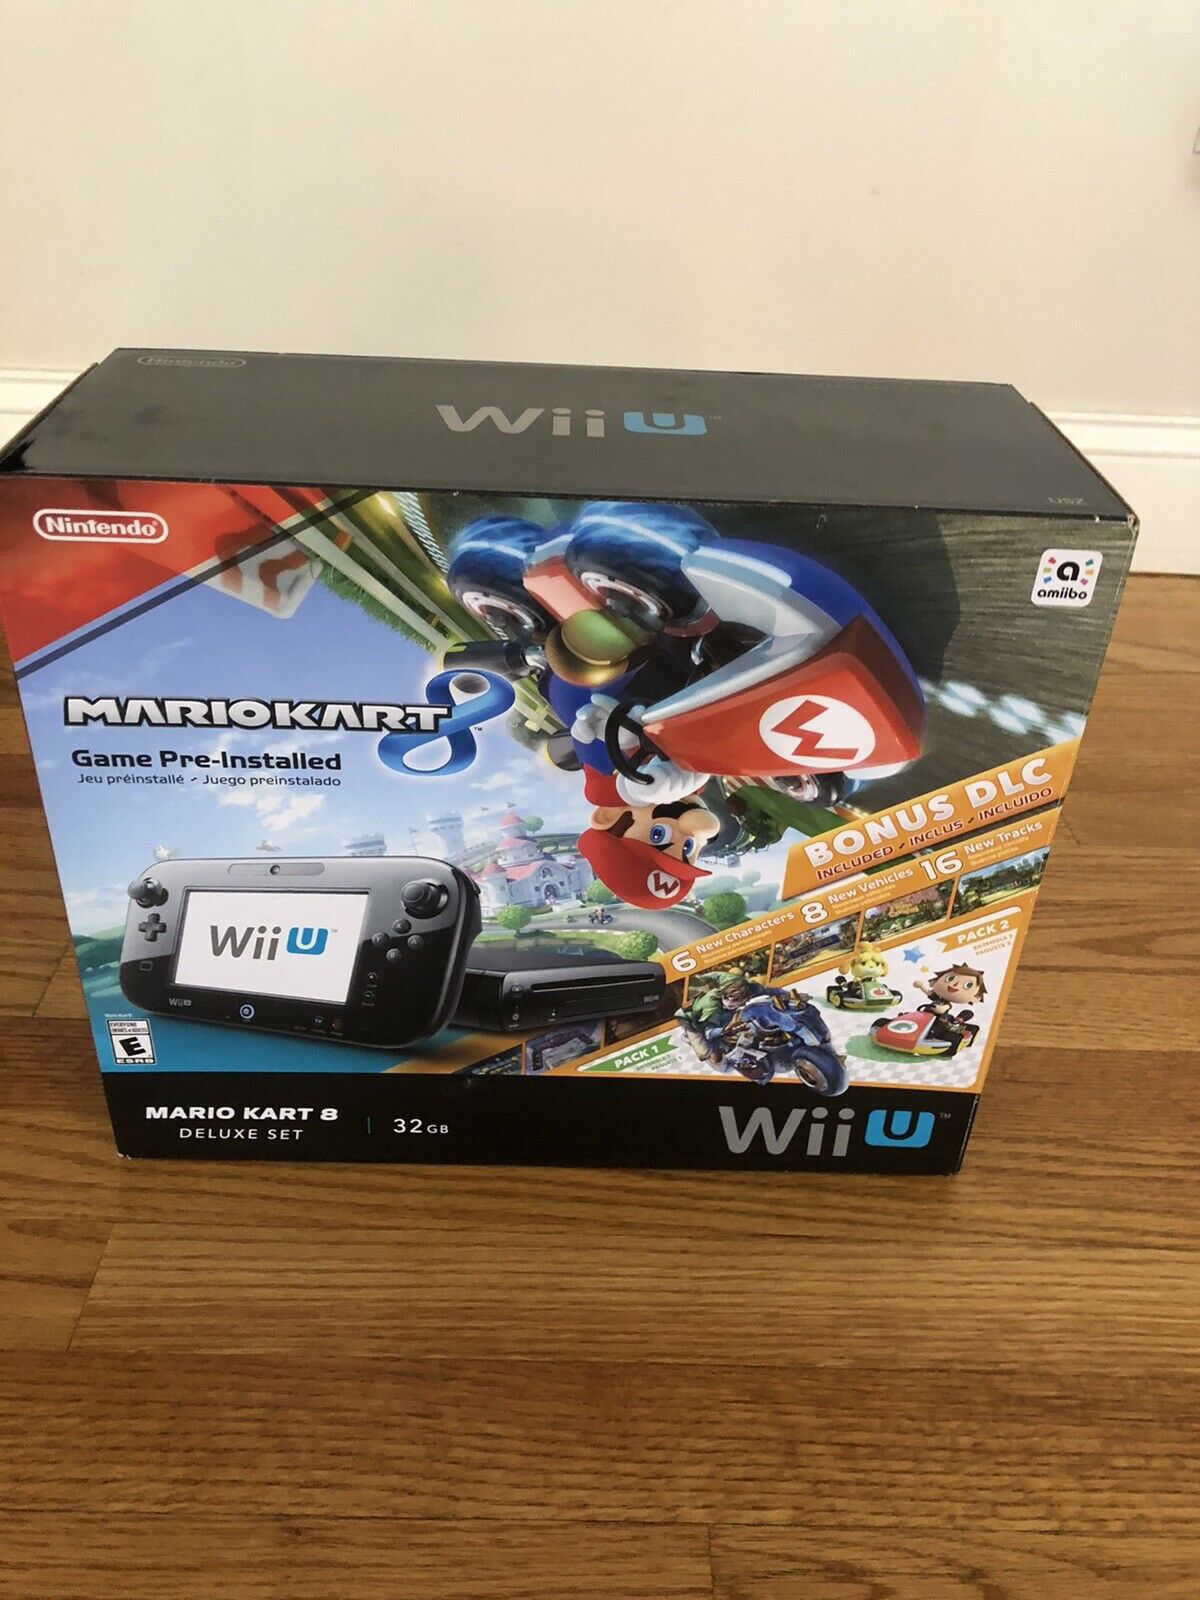 Nintendo Wii U 32gb Mario Kart 8 Deluxe Bundle Console And14 Extra Video Games Free Ship 7747